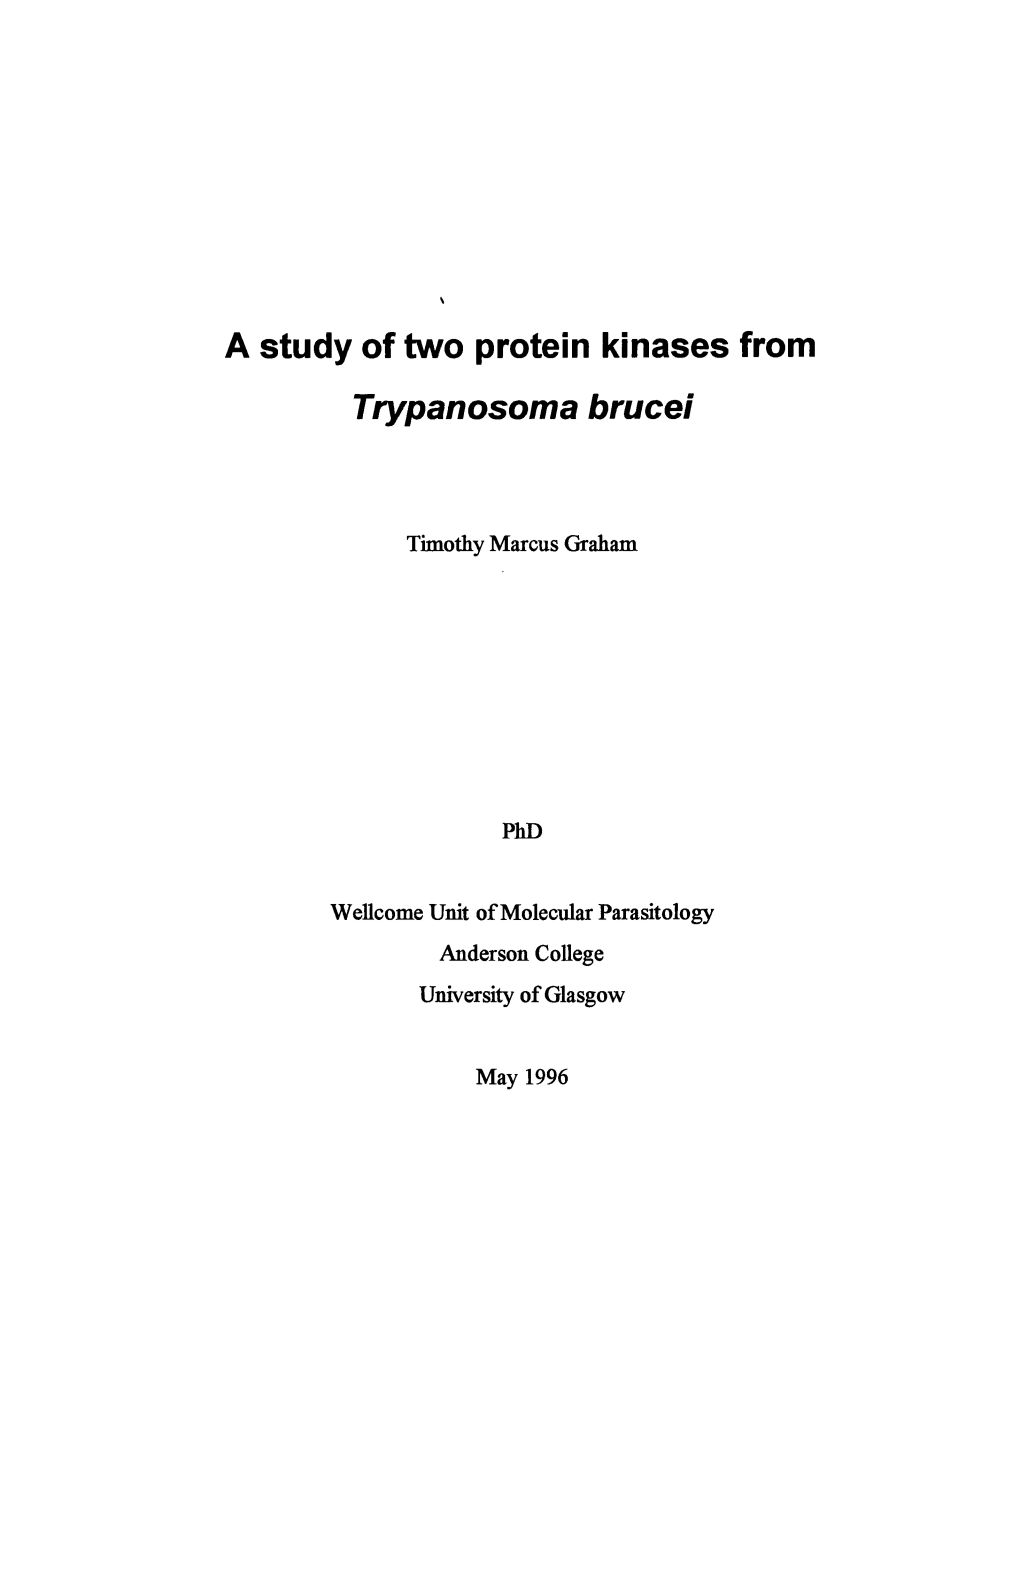 A Study of Two Protein Kinases from Trypanosoma Brucei